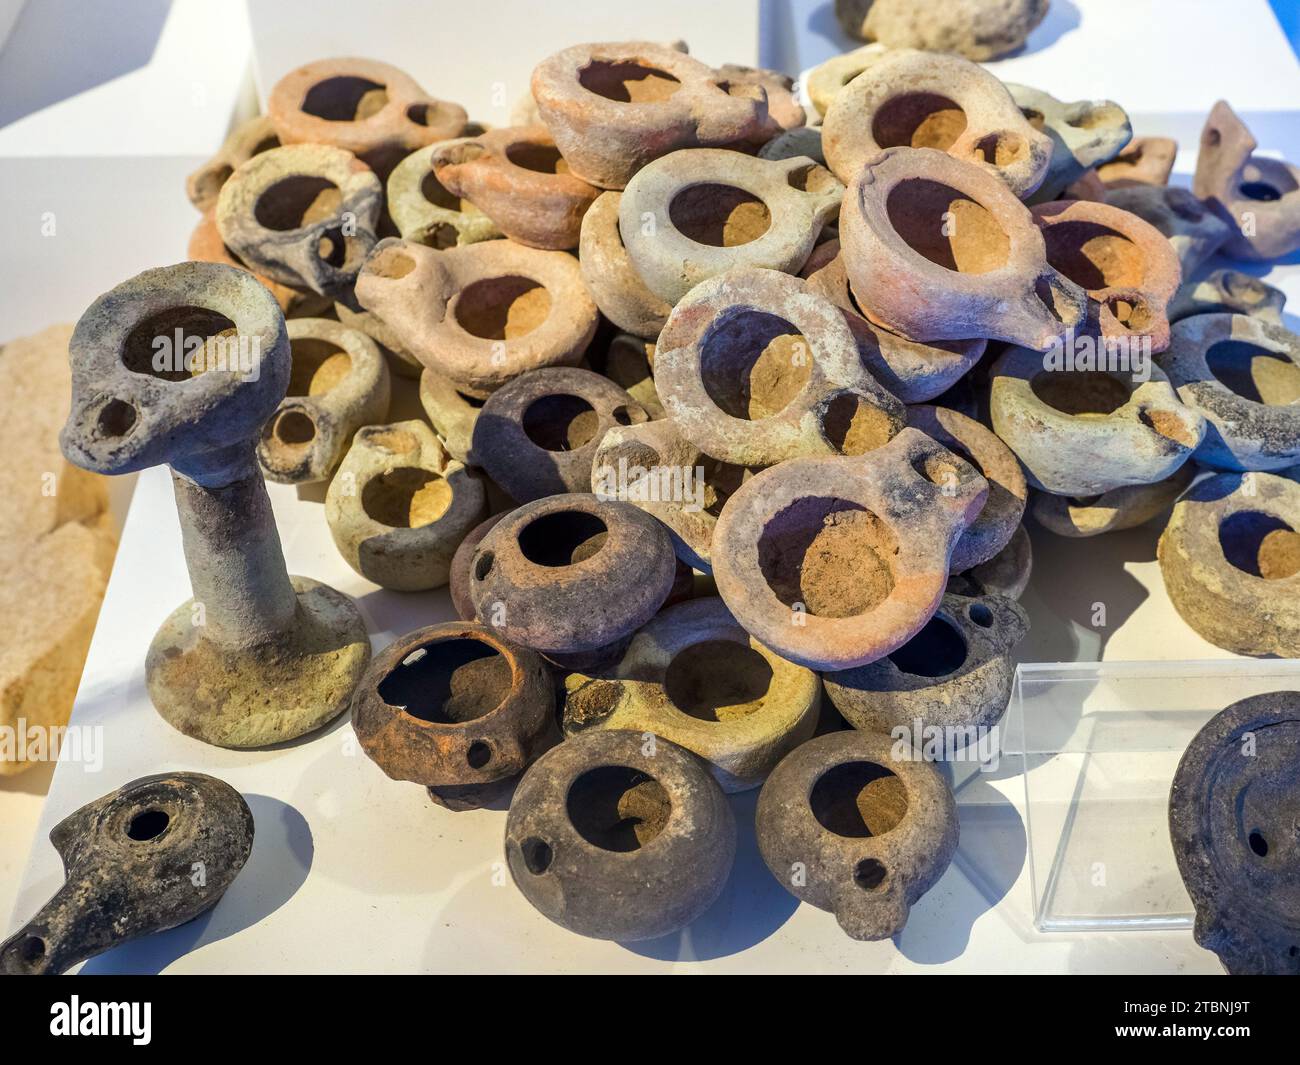 Deposit of votive lamps, 1st century Ac from a ritual pit - Baglio Anselmi archaeological museum - Marsala, Sicily, Italy Stock Photo